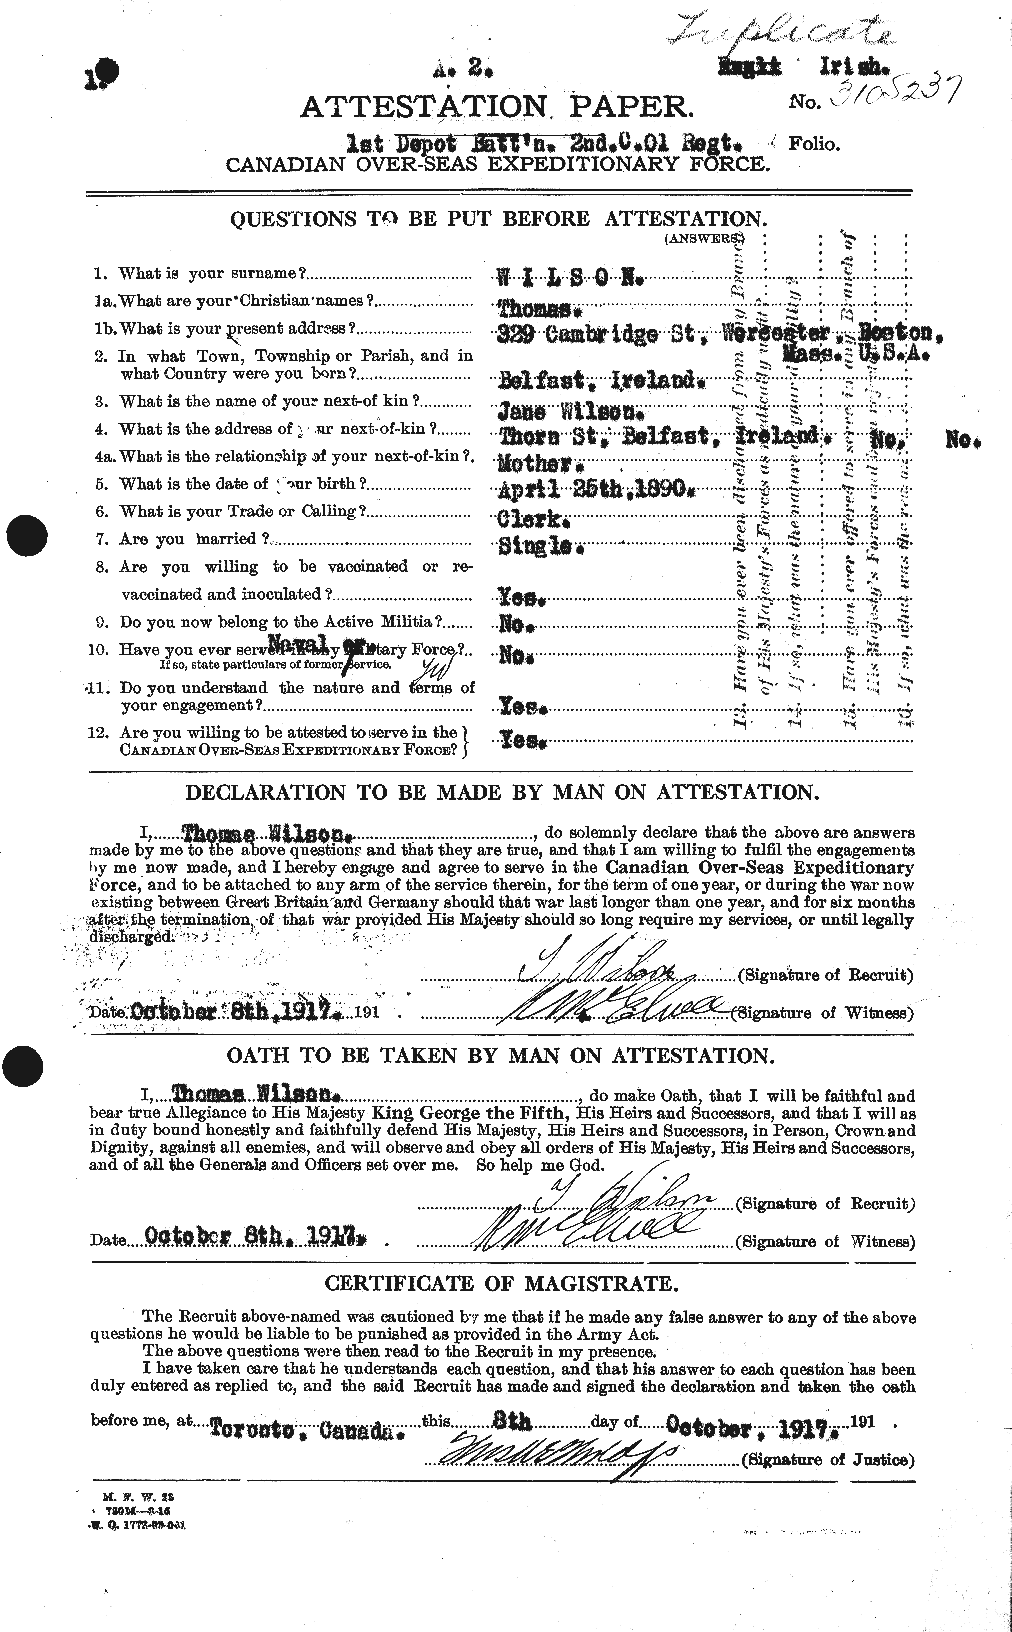 Personnel Records of the First World War - CEF 681173a